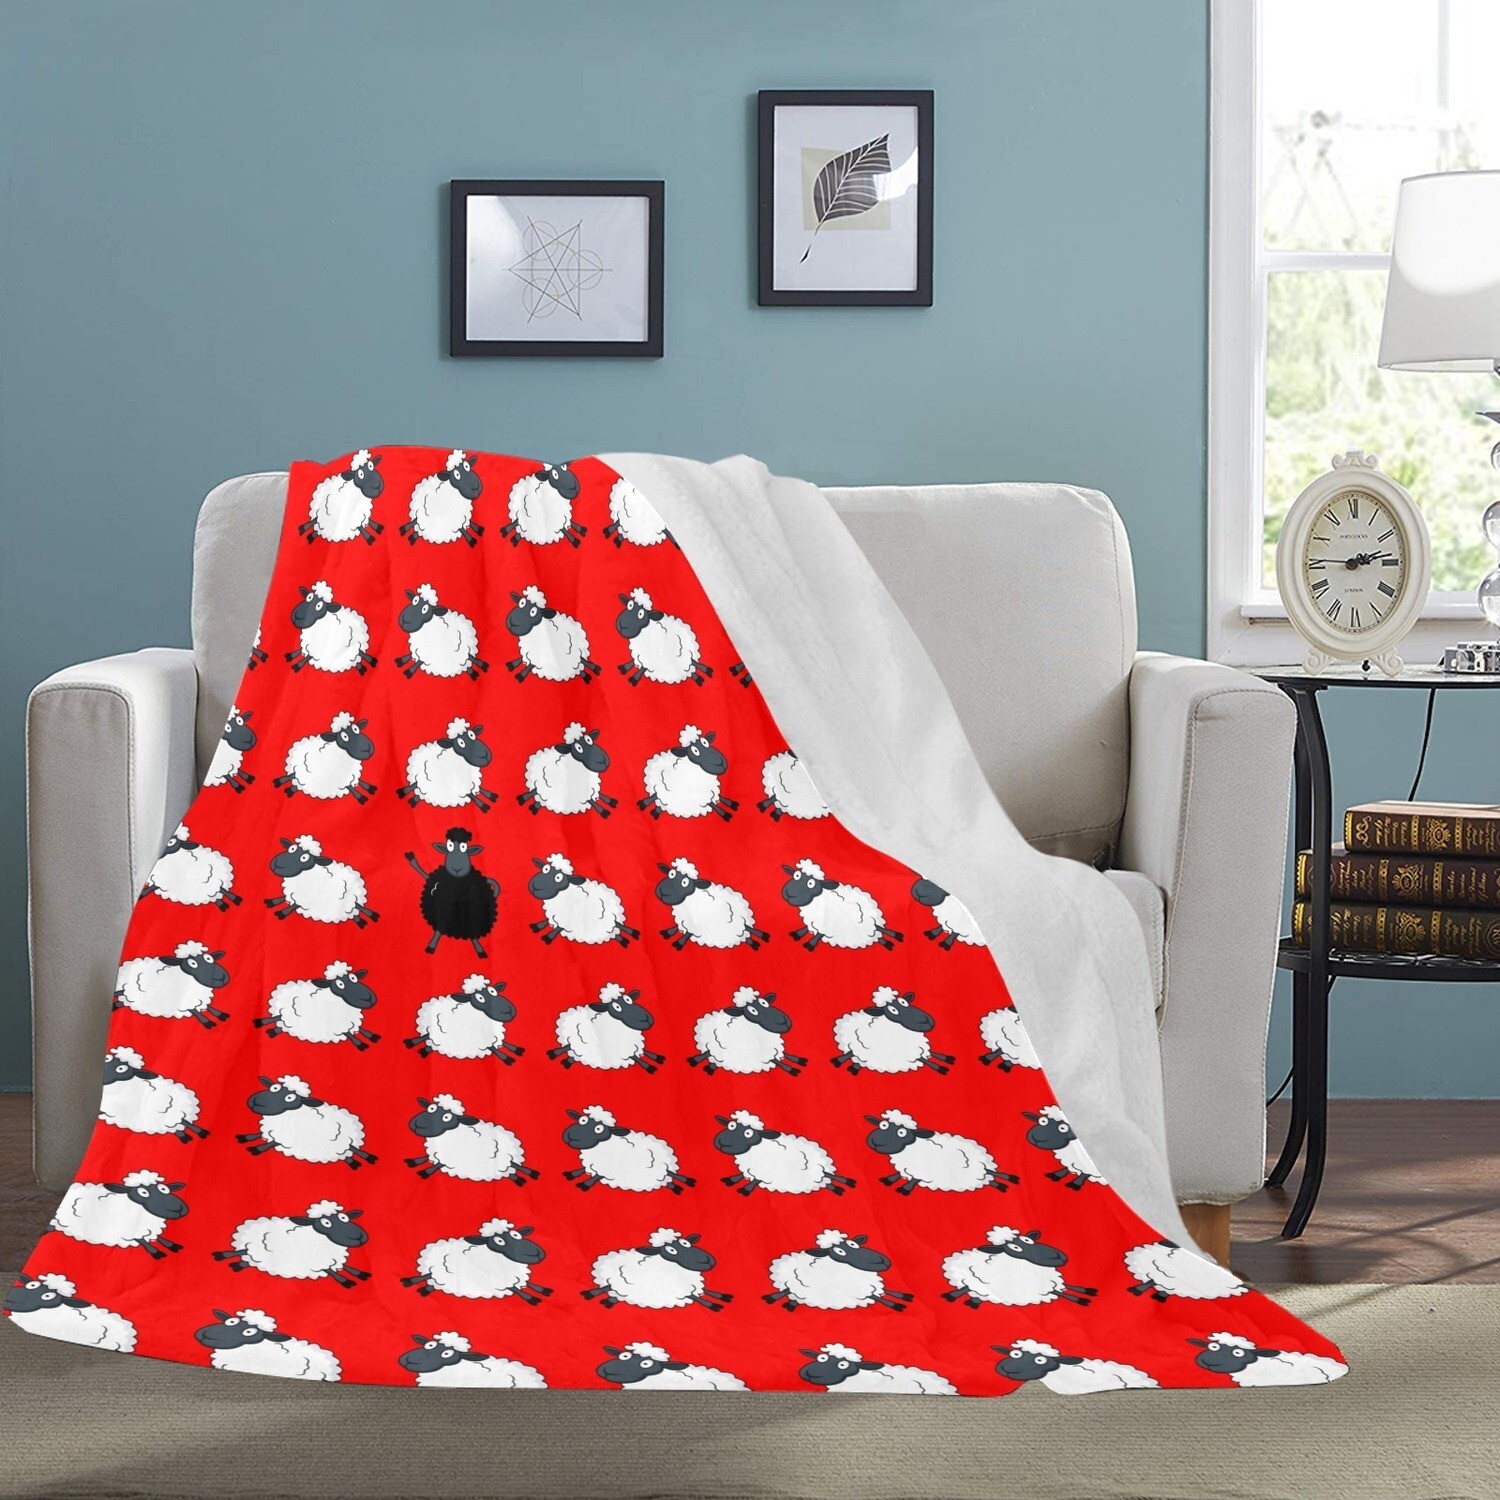 🤴🏽👸🏽🐑Large Ultra-Soft Micro Fleece Blanket Black sheep, Lady Diana, Princess of Wales, Royal, gift, gift for her, gift for him, gift for them, 70"x80", red